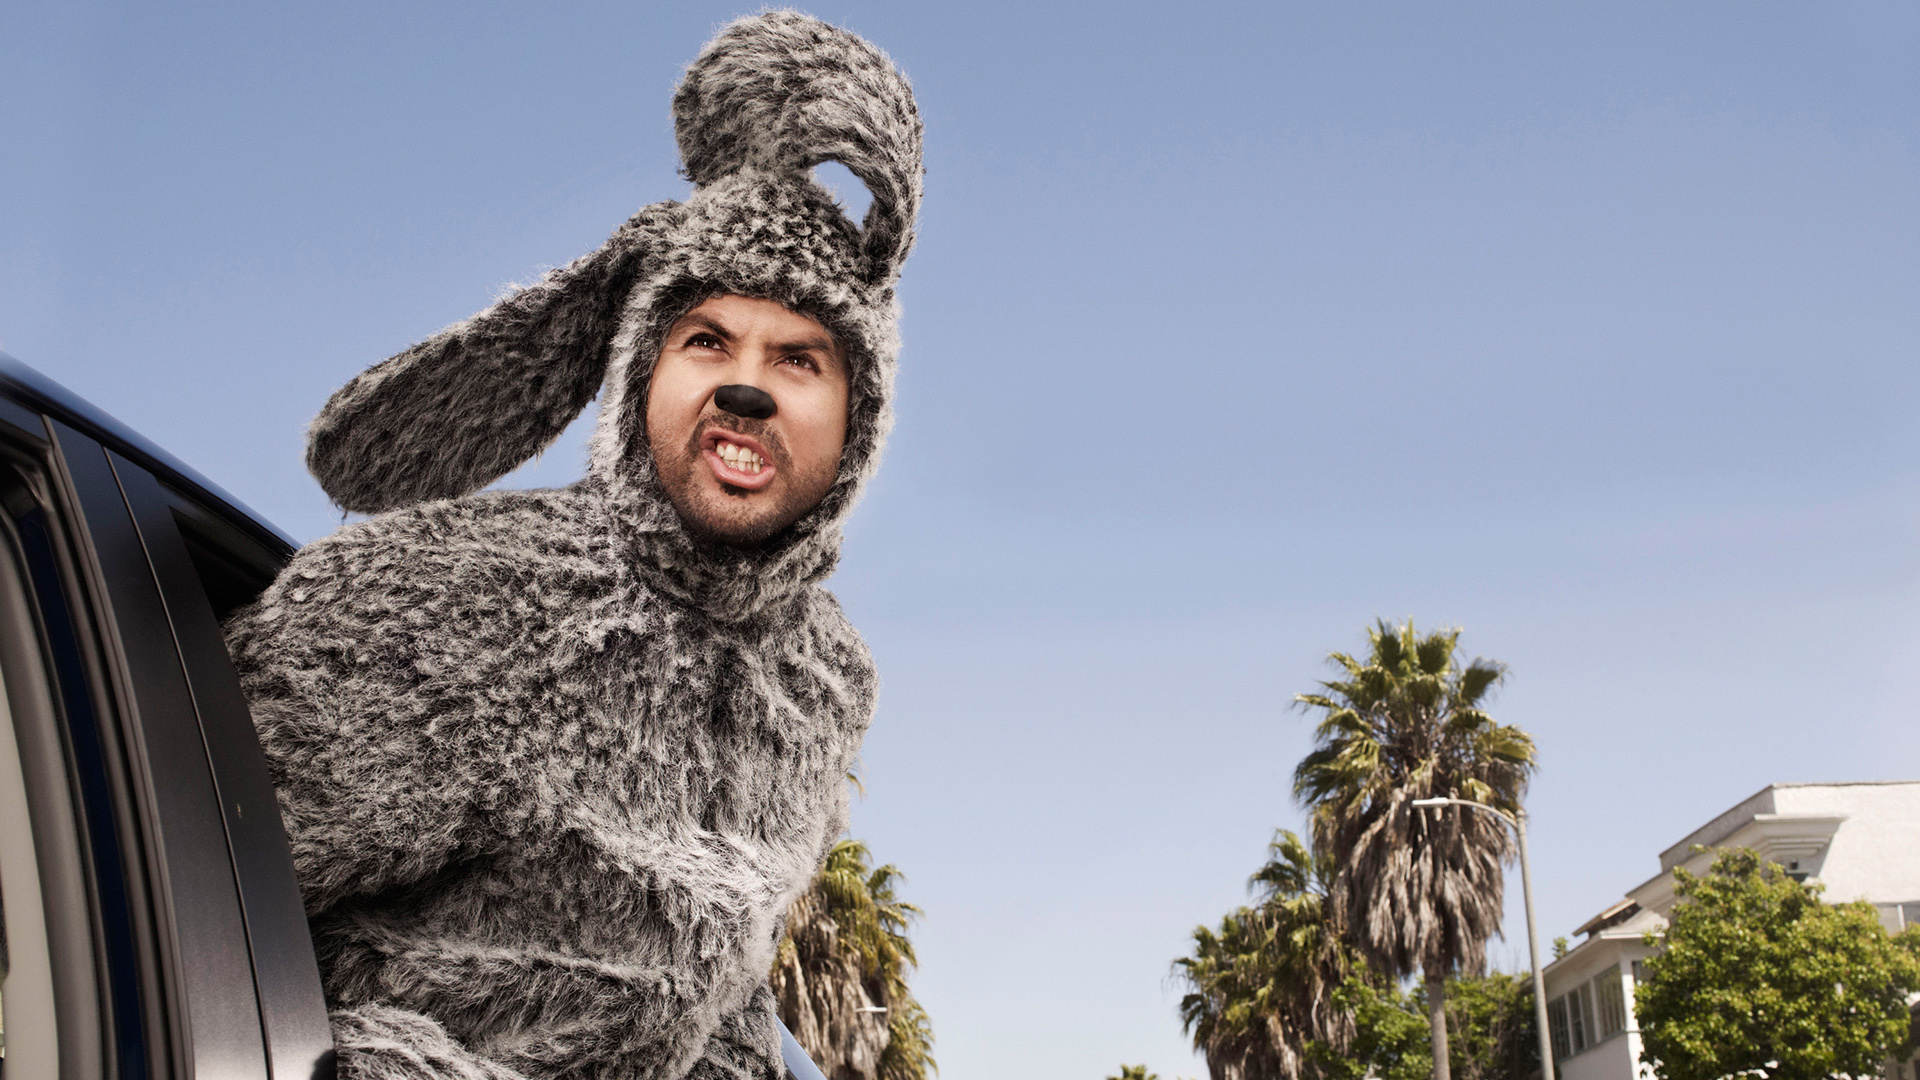 Images of Wilfred | 1920x1080